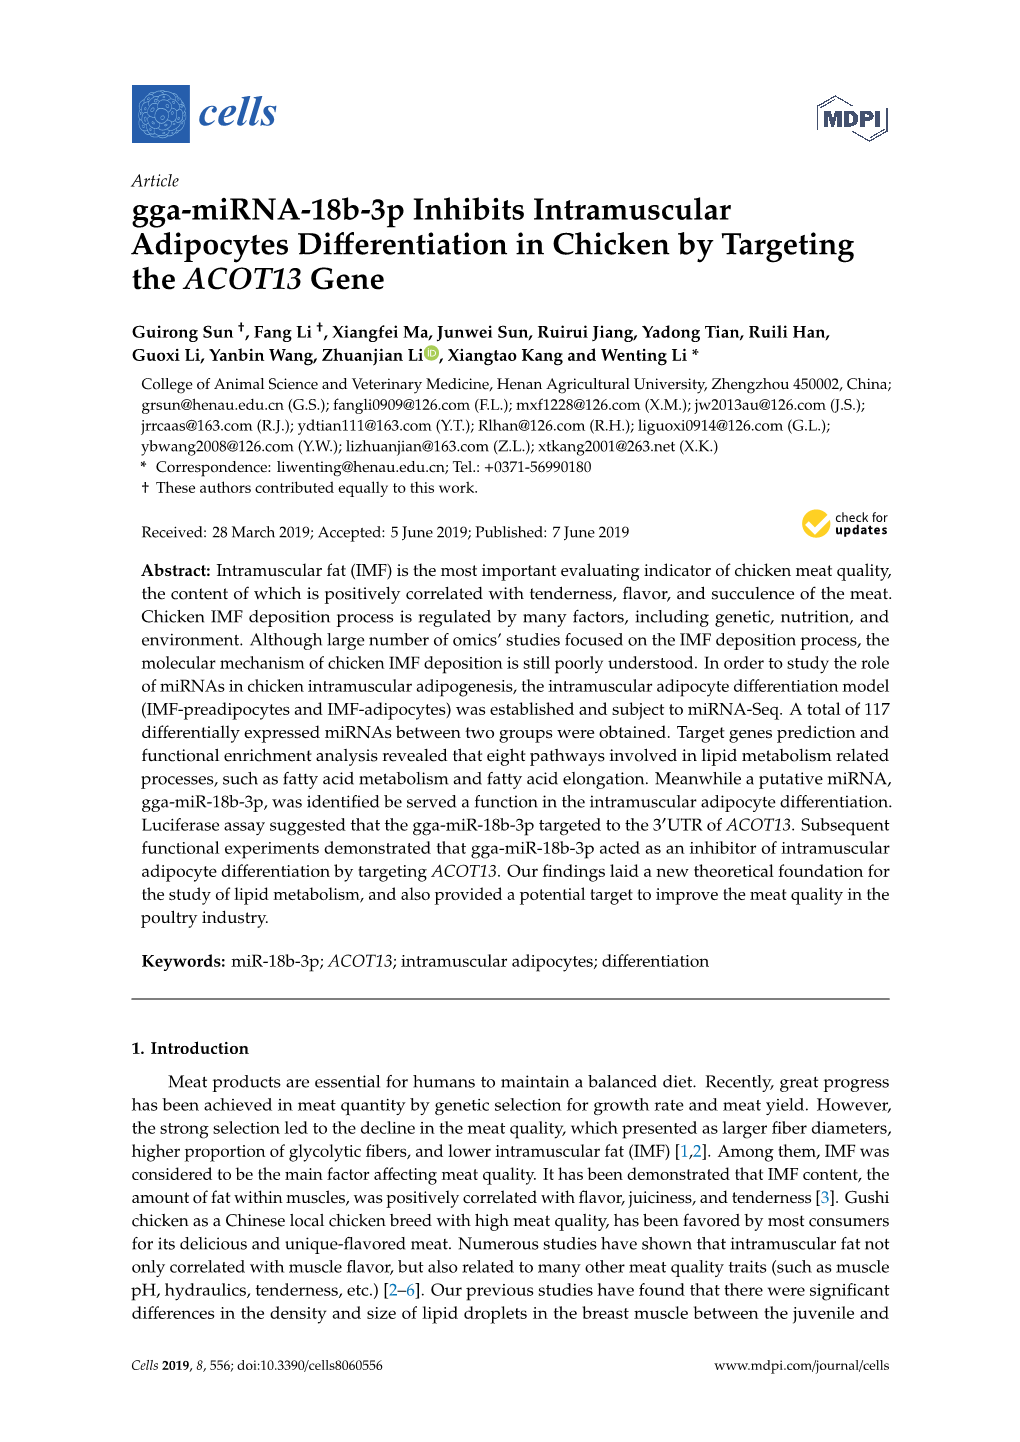 Gga-Mirna-18B-3P Inhibits Intramuscular Adipocytes Differentiation in Chicken by Targeting the ACOT13 Gene